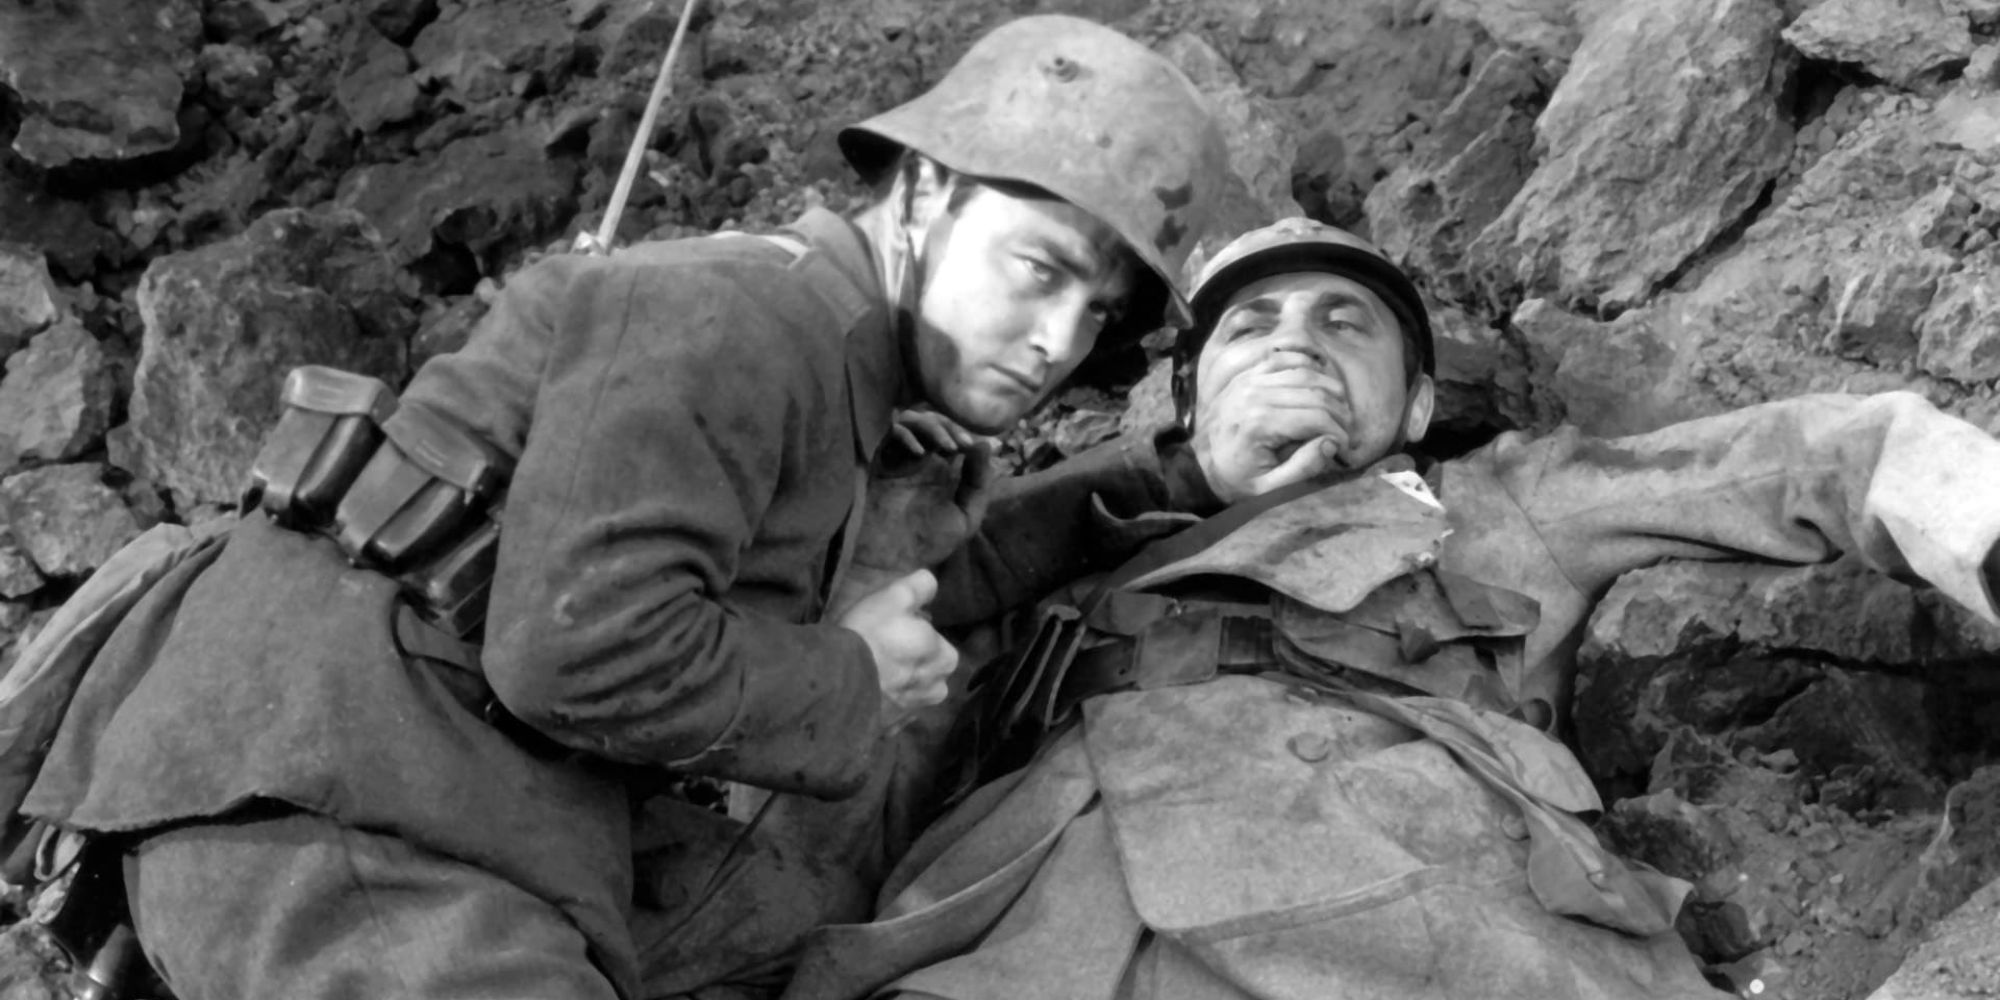 Paul claps his hand over the mouth of a dying French soldier